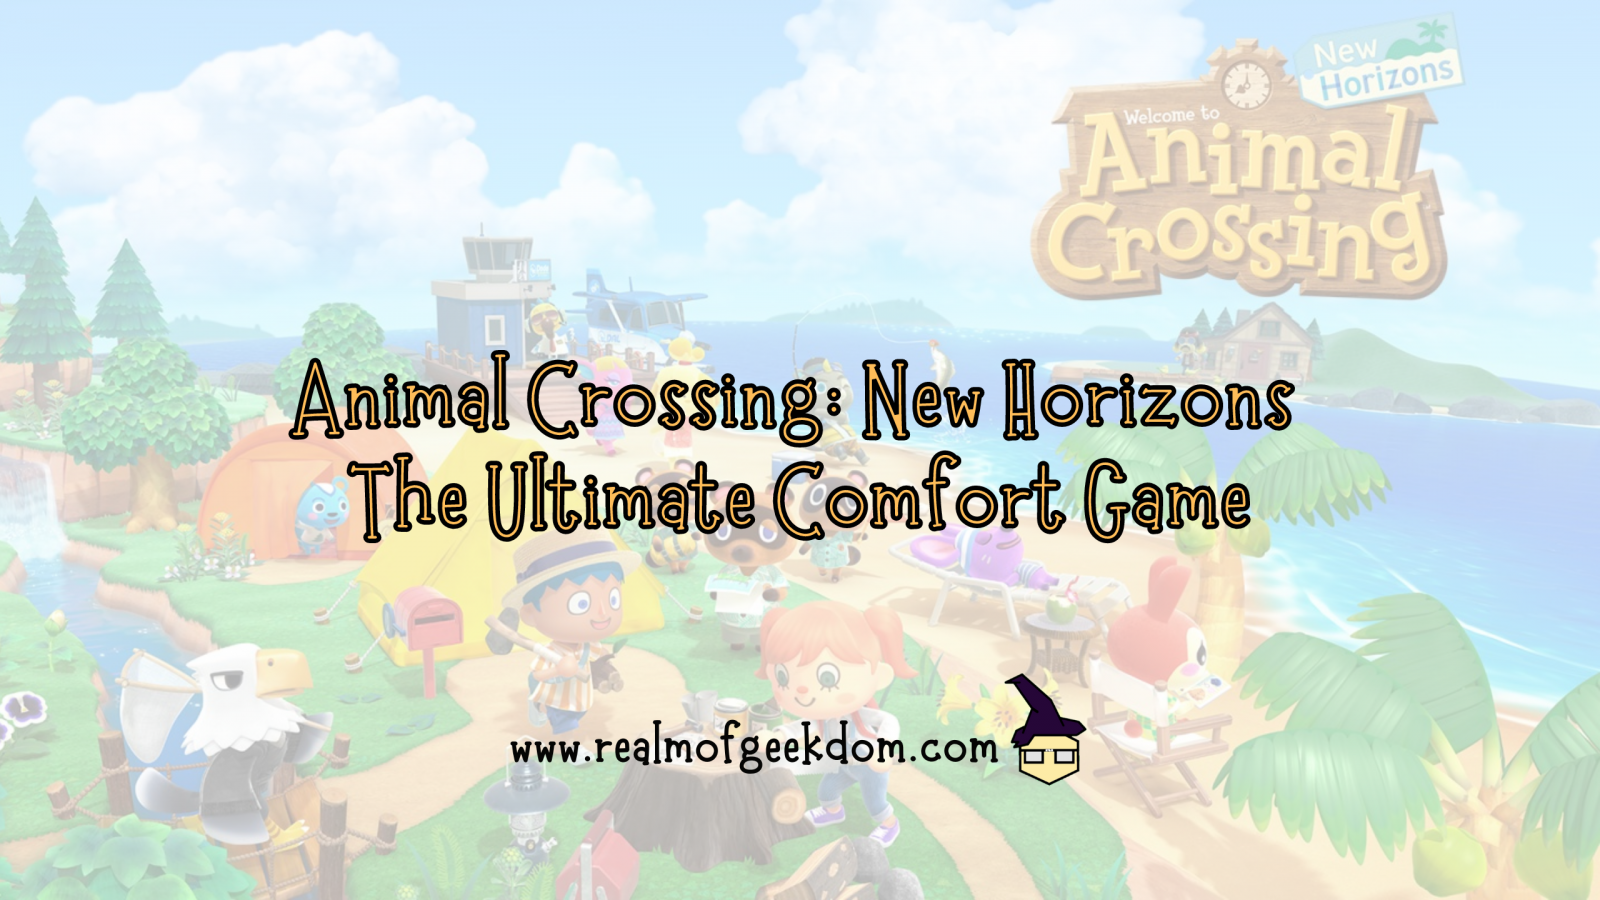 Animal Crossing: New Horizions - the ultimate comfort game title image